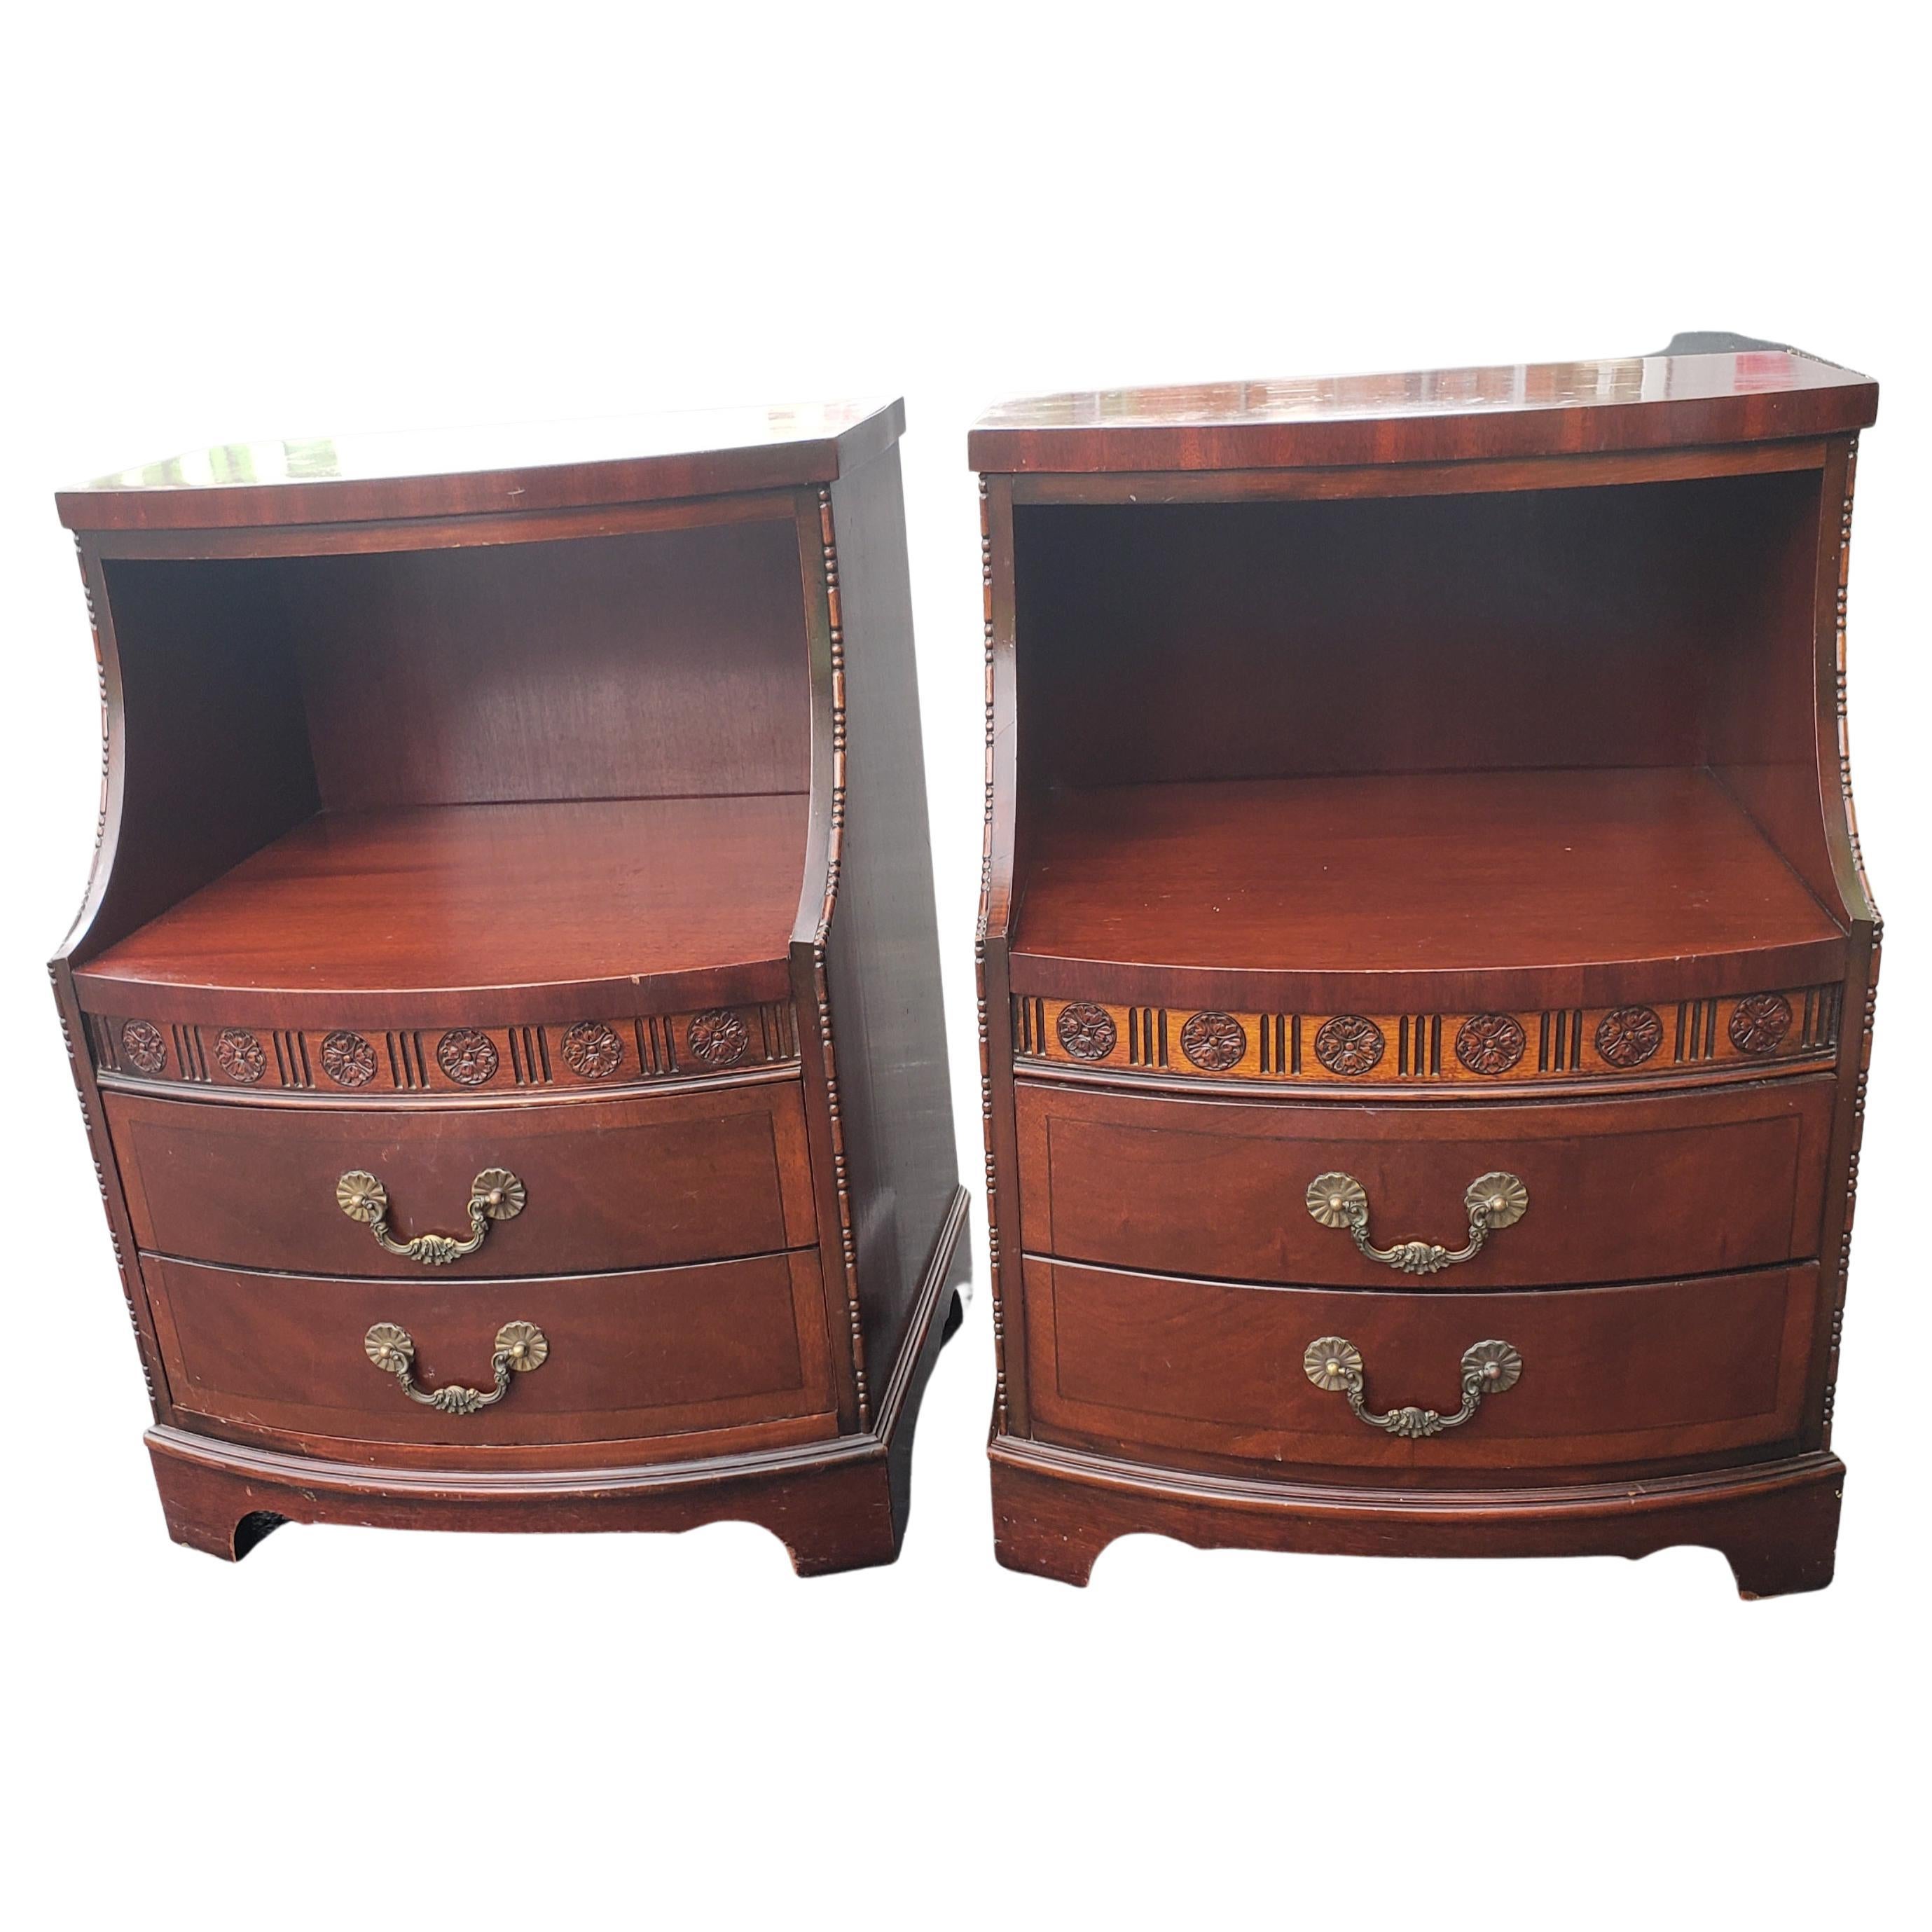 Fine pair of antique nightstands. Estate find. Highly desirable Kent Coffey high quality furniture. The Mainwaring collection. Beautiful rich mahogany, solids and veneers. Bow front with beading on the sides. Two roomy drawers, open center for